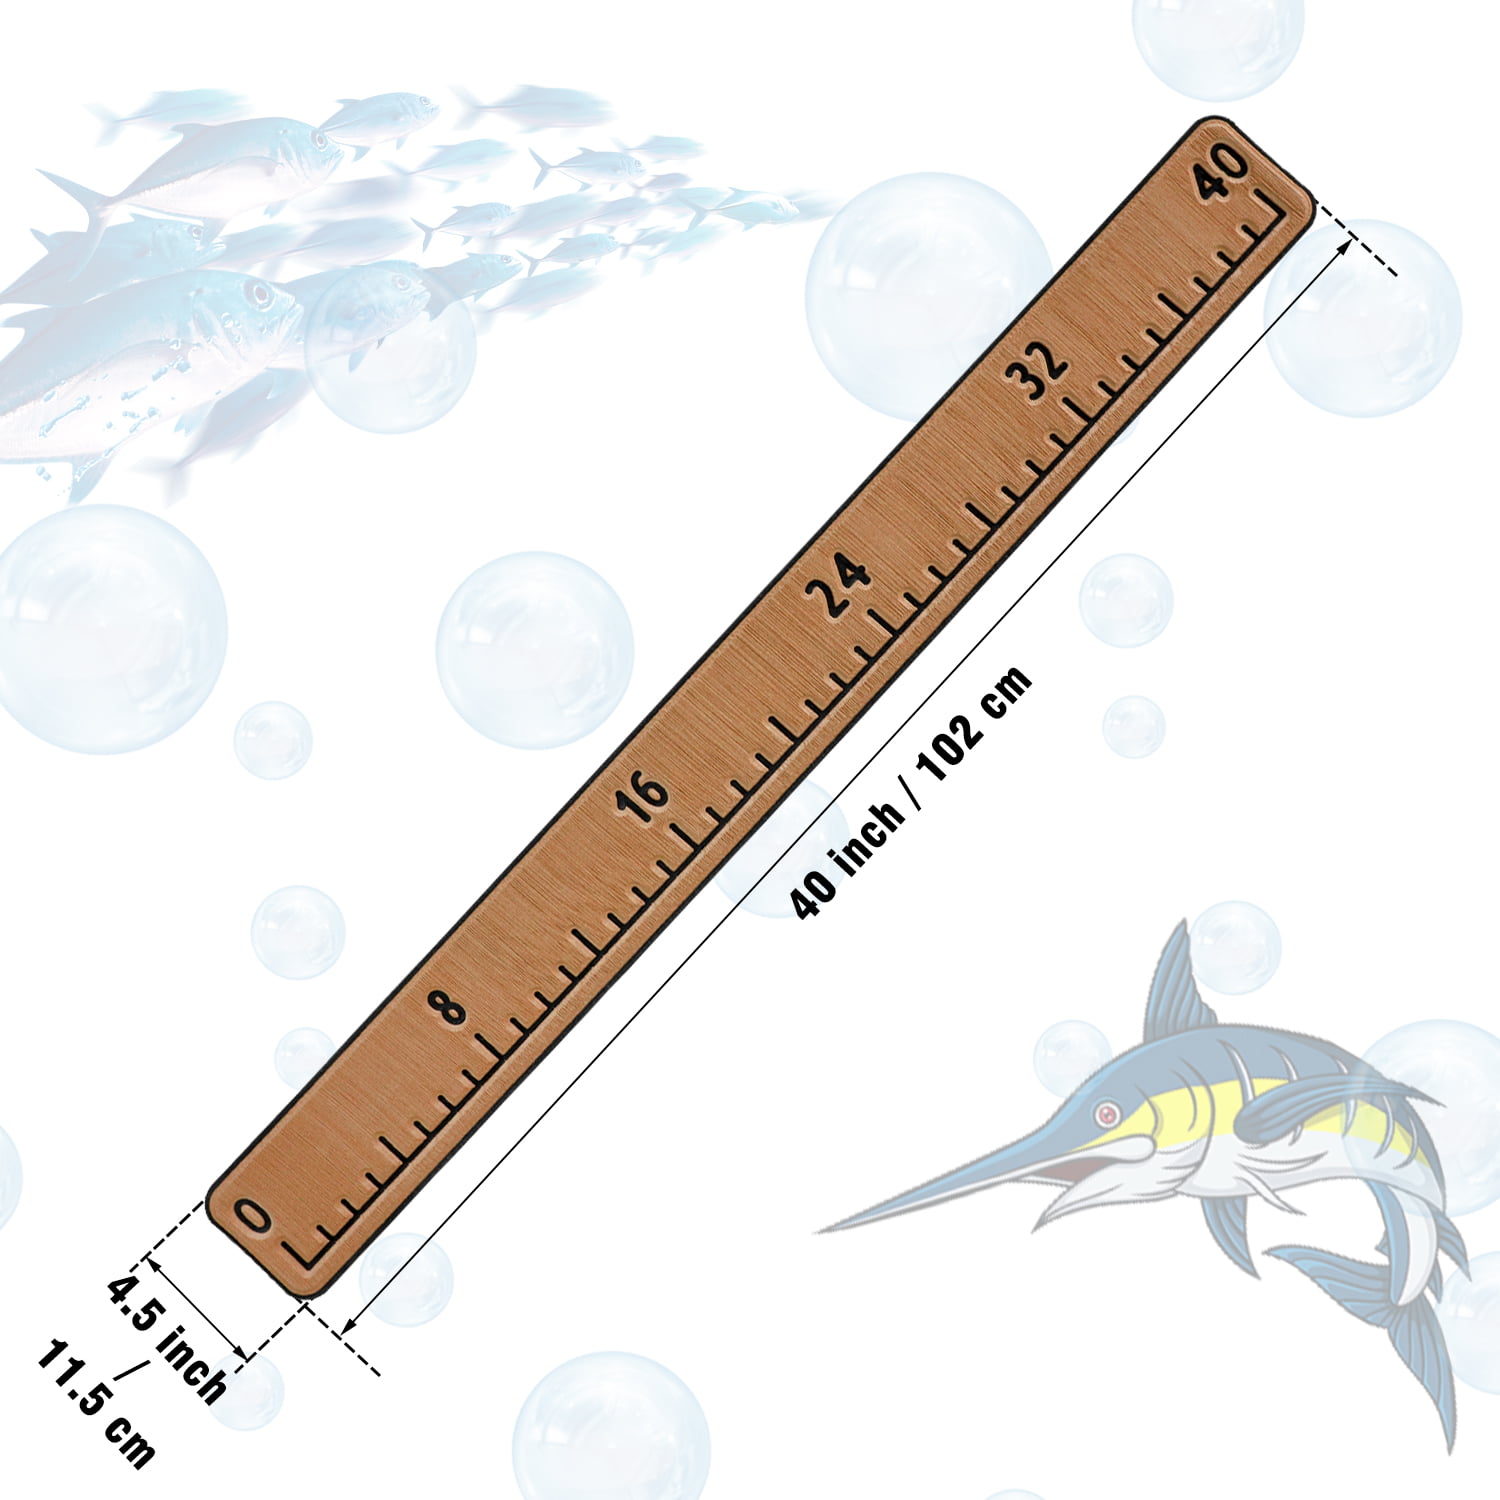 DS. Distinctive Style Fish Ruler Sticker 36-Inch Waterproof Adhesive Ruler Tape Dual Scale Fish Measuring Tape for Boat, Kayak and Table